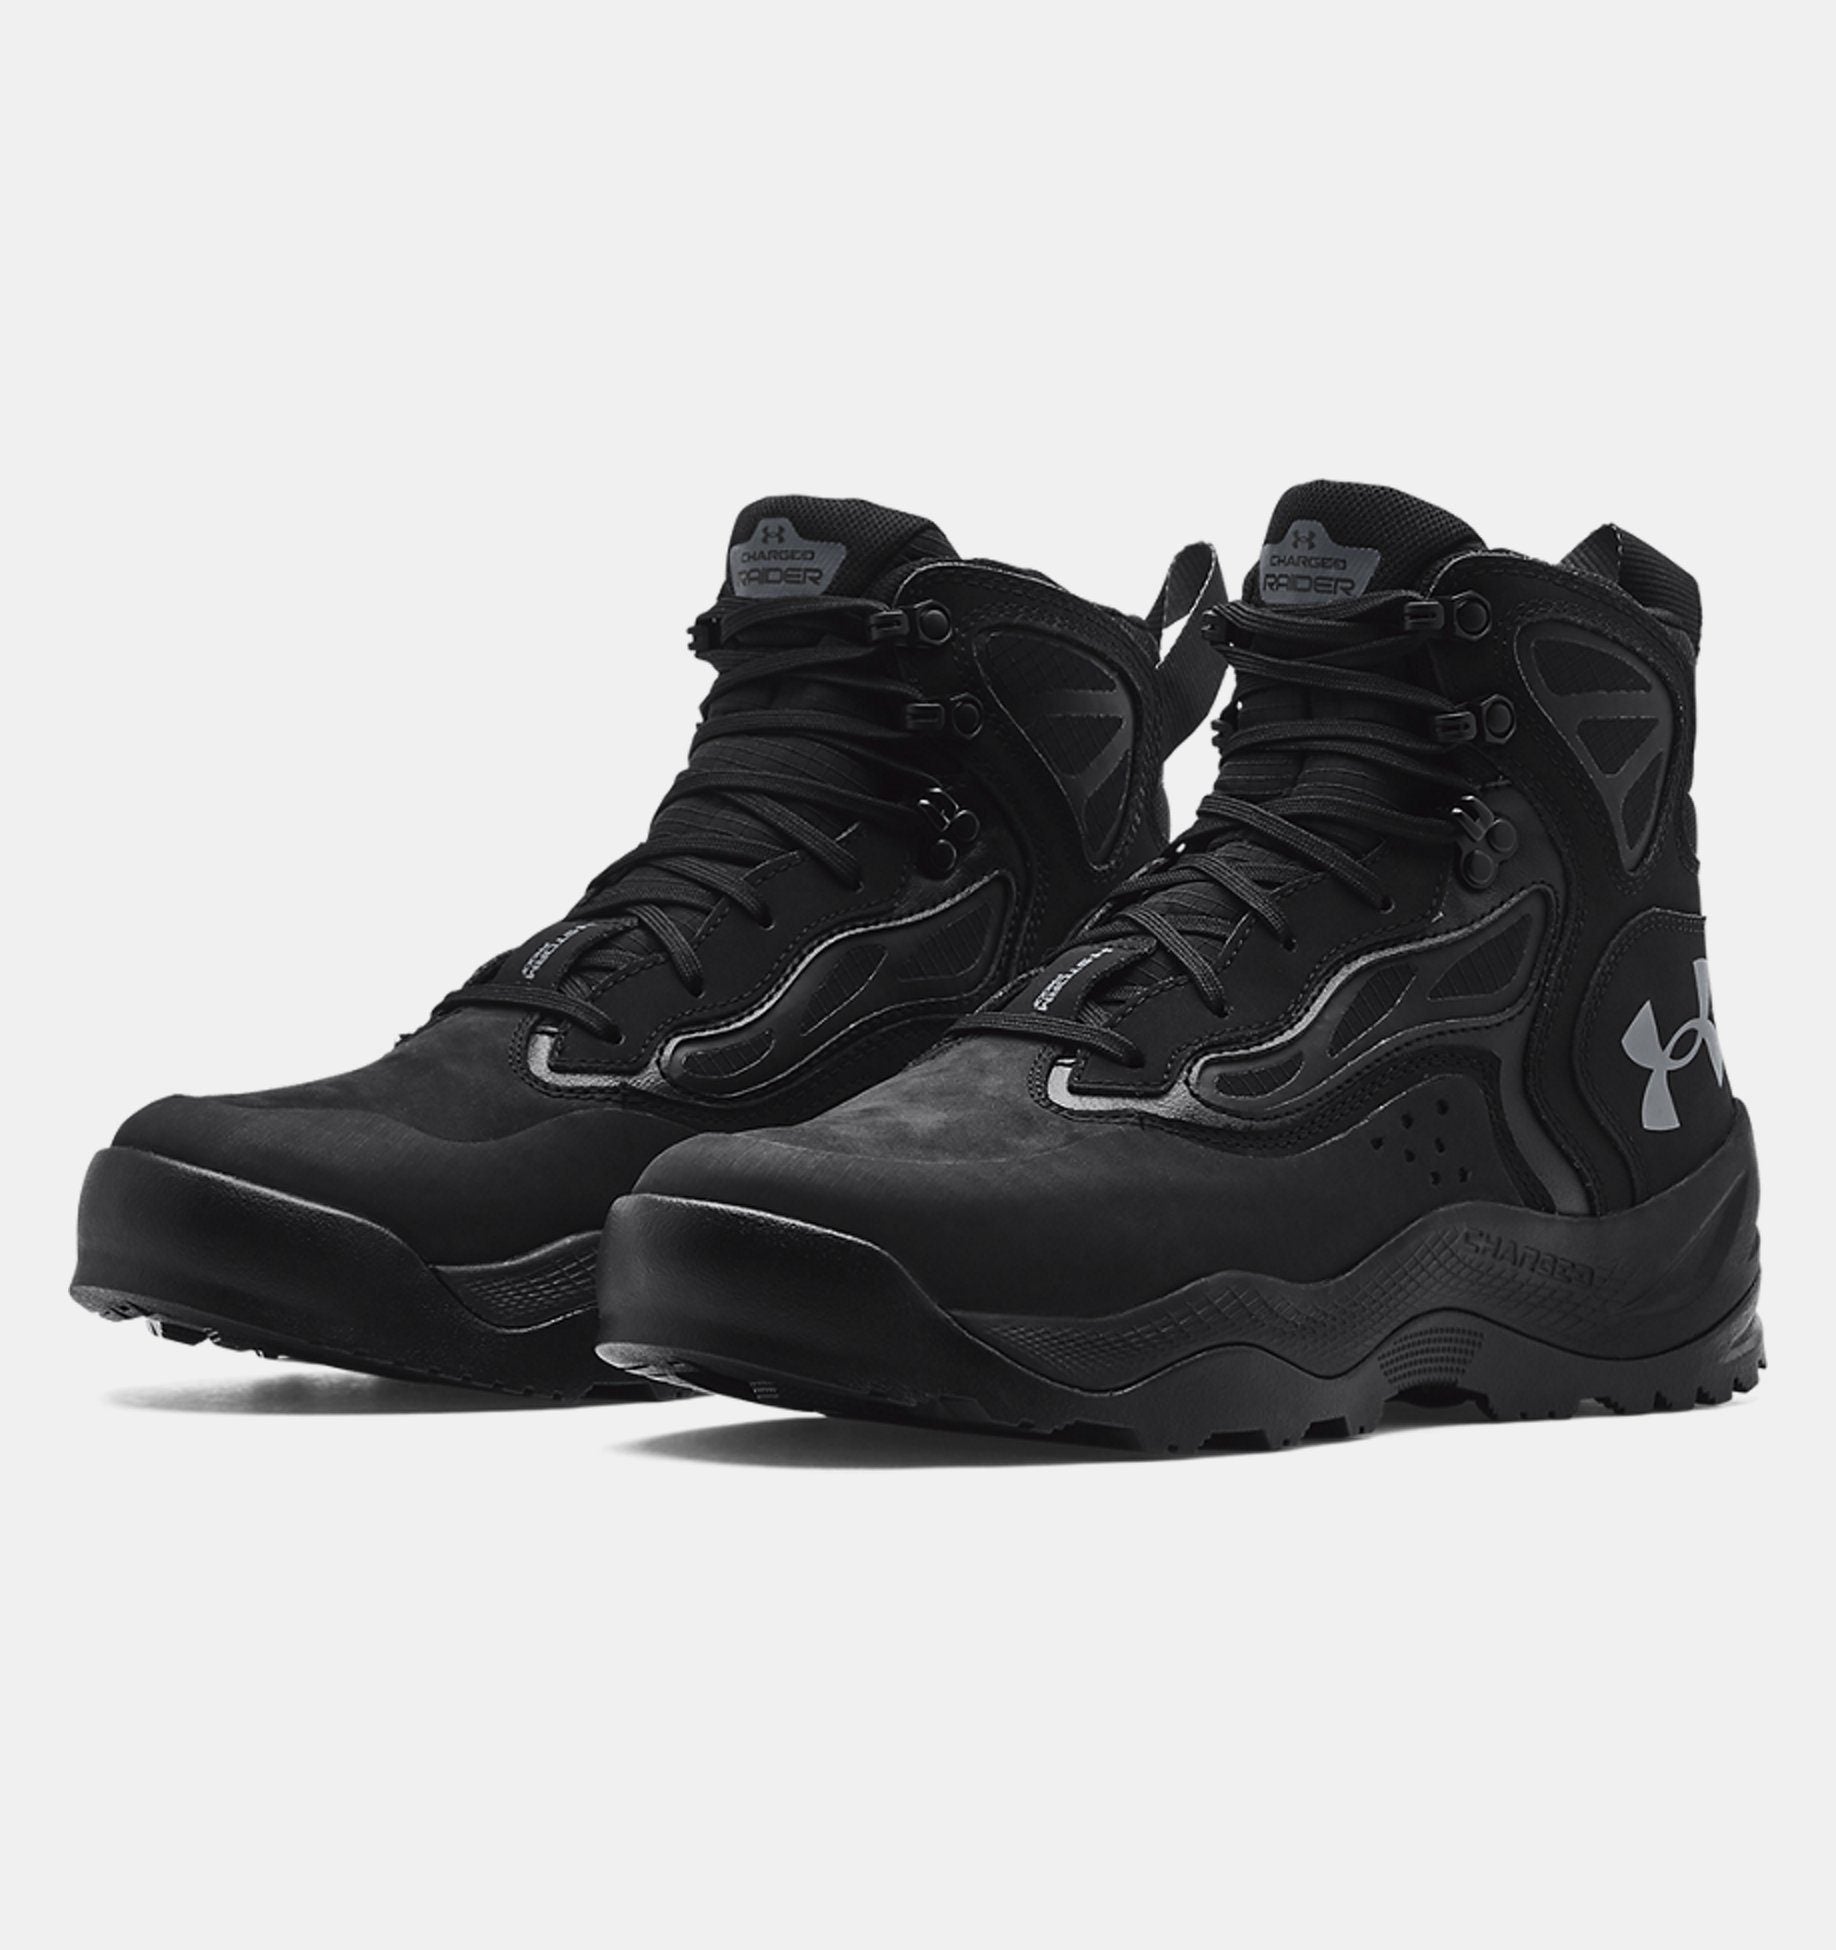 Under Armour Charged Raider Mid Waterproof 6